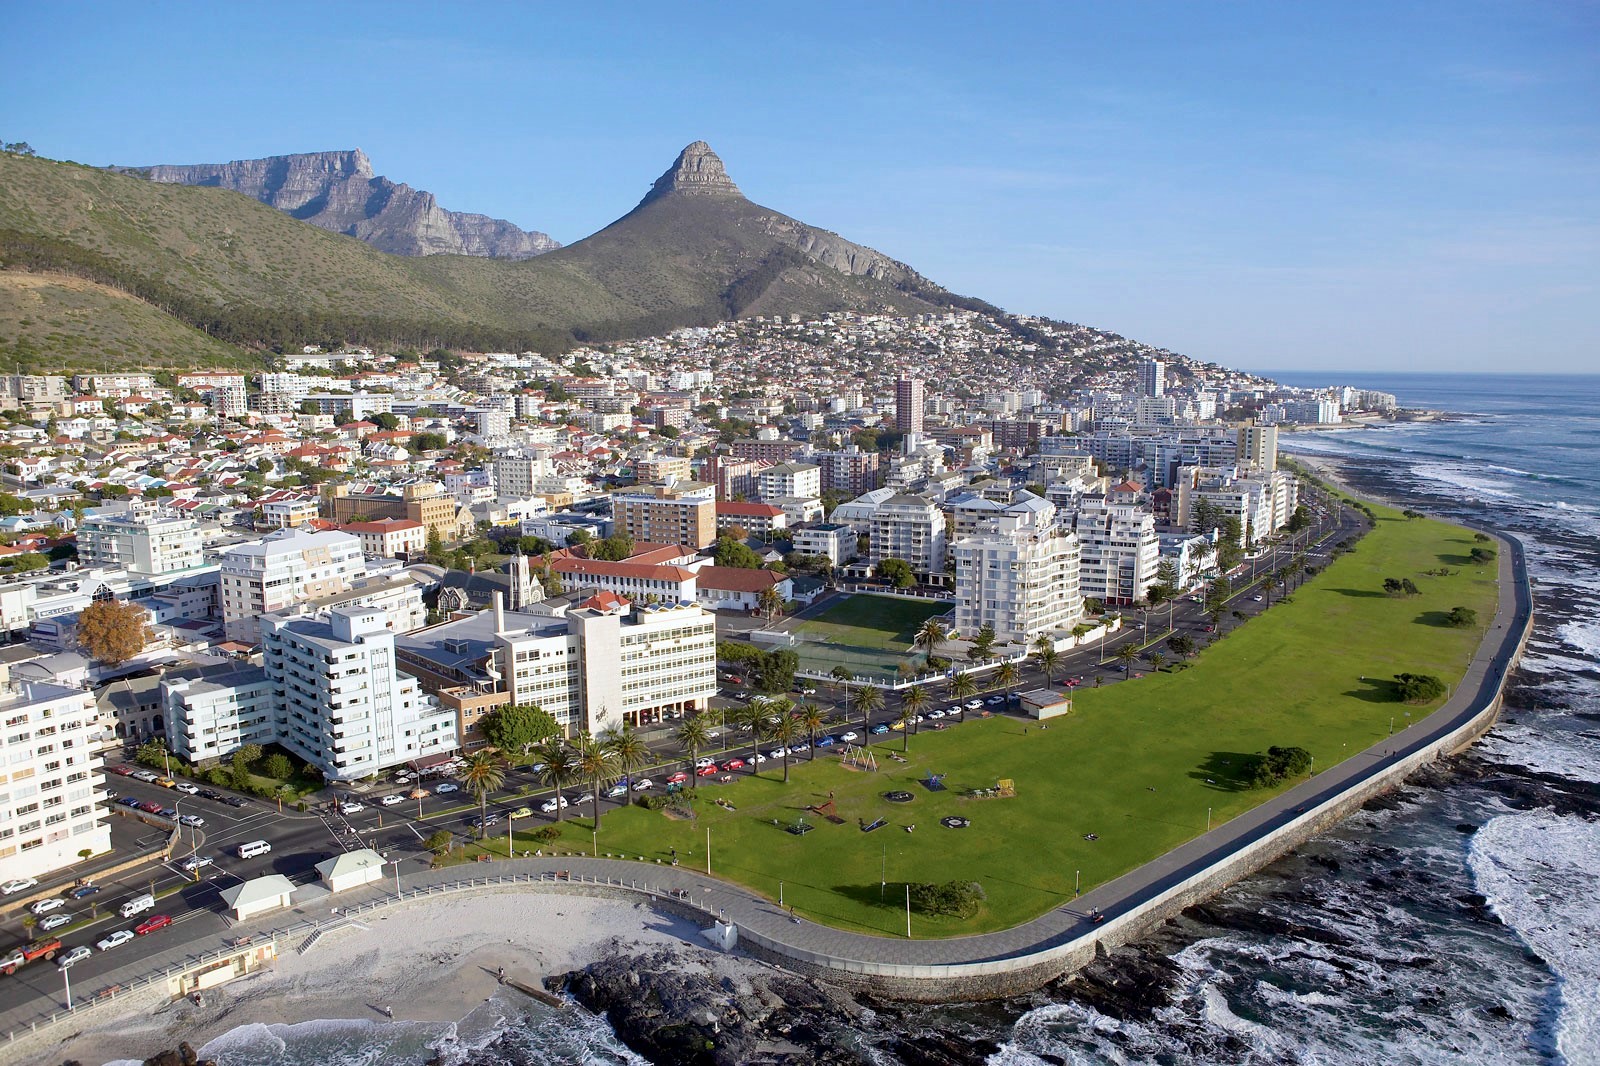 The 10 most innovative African cities